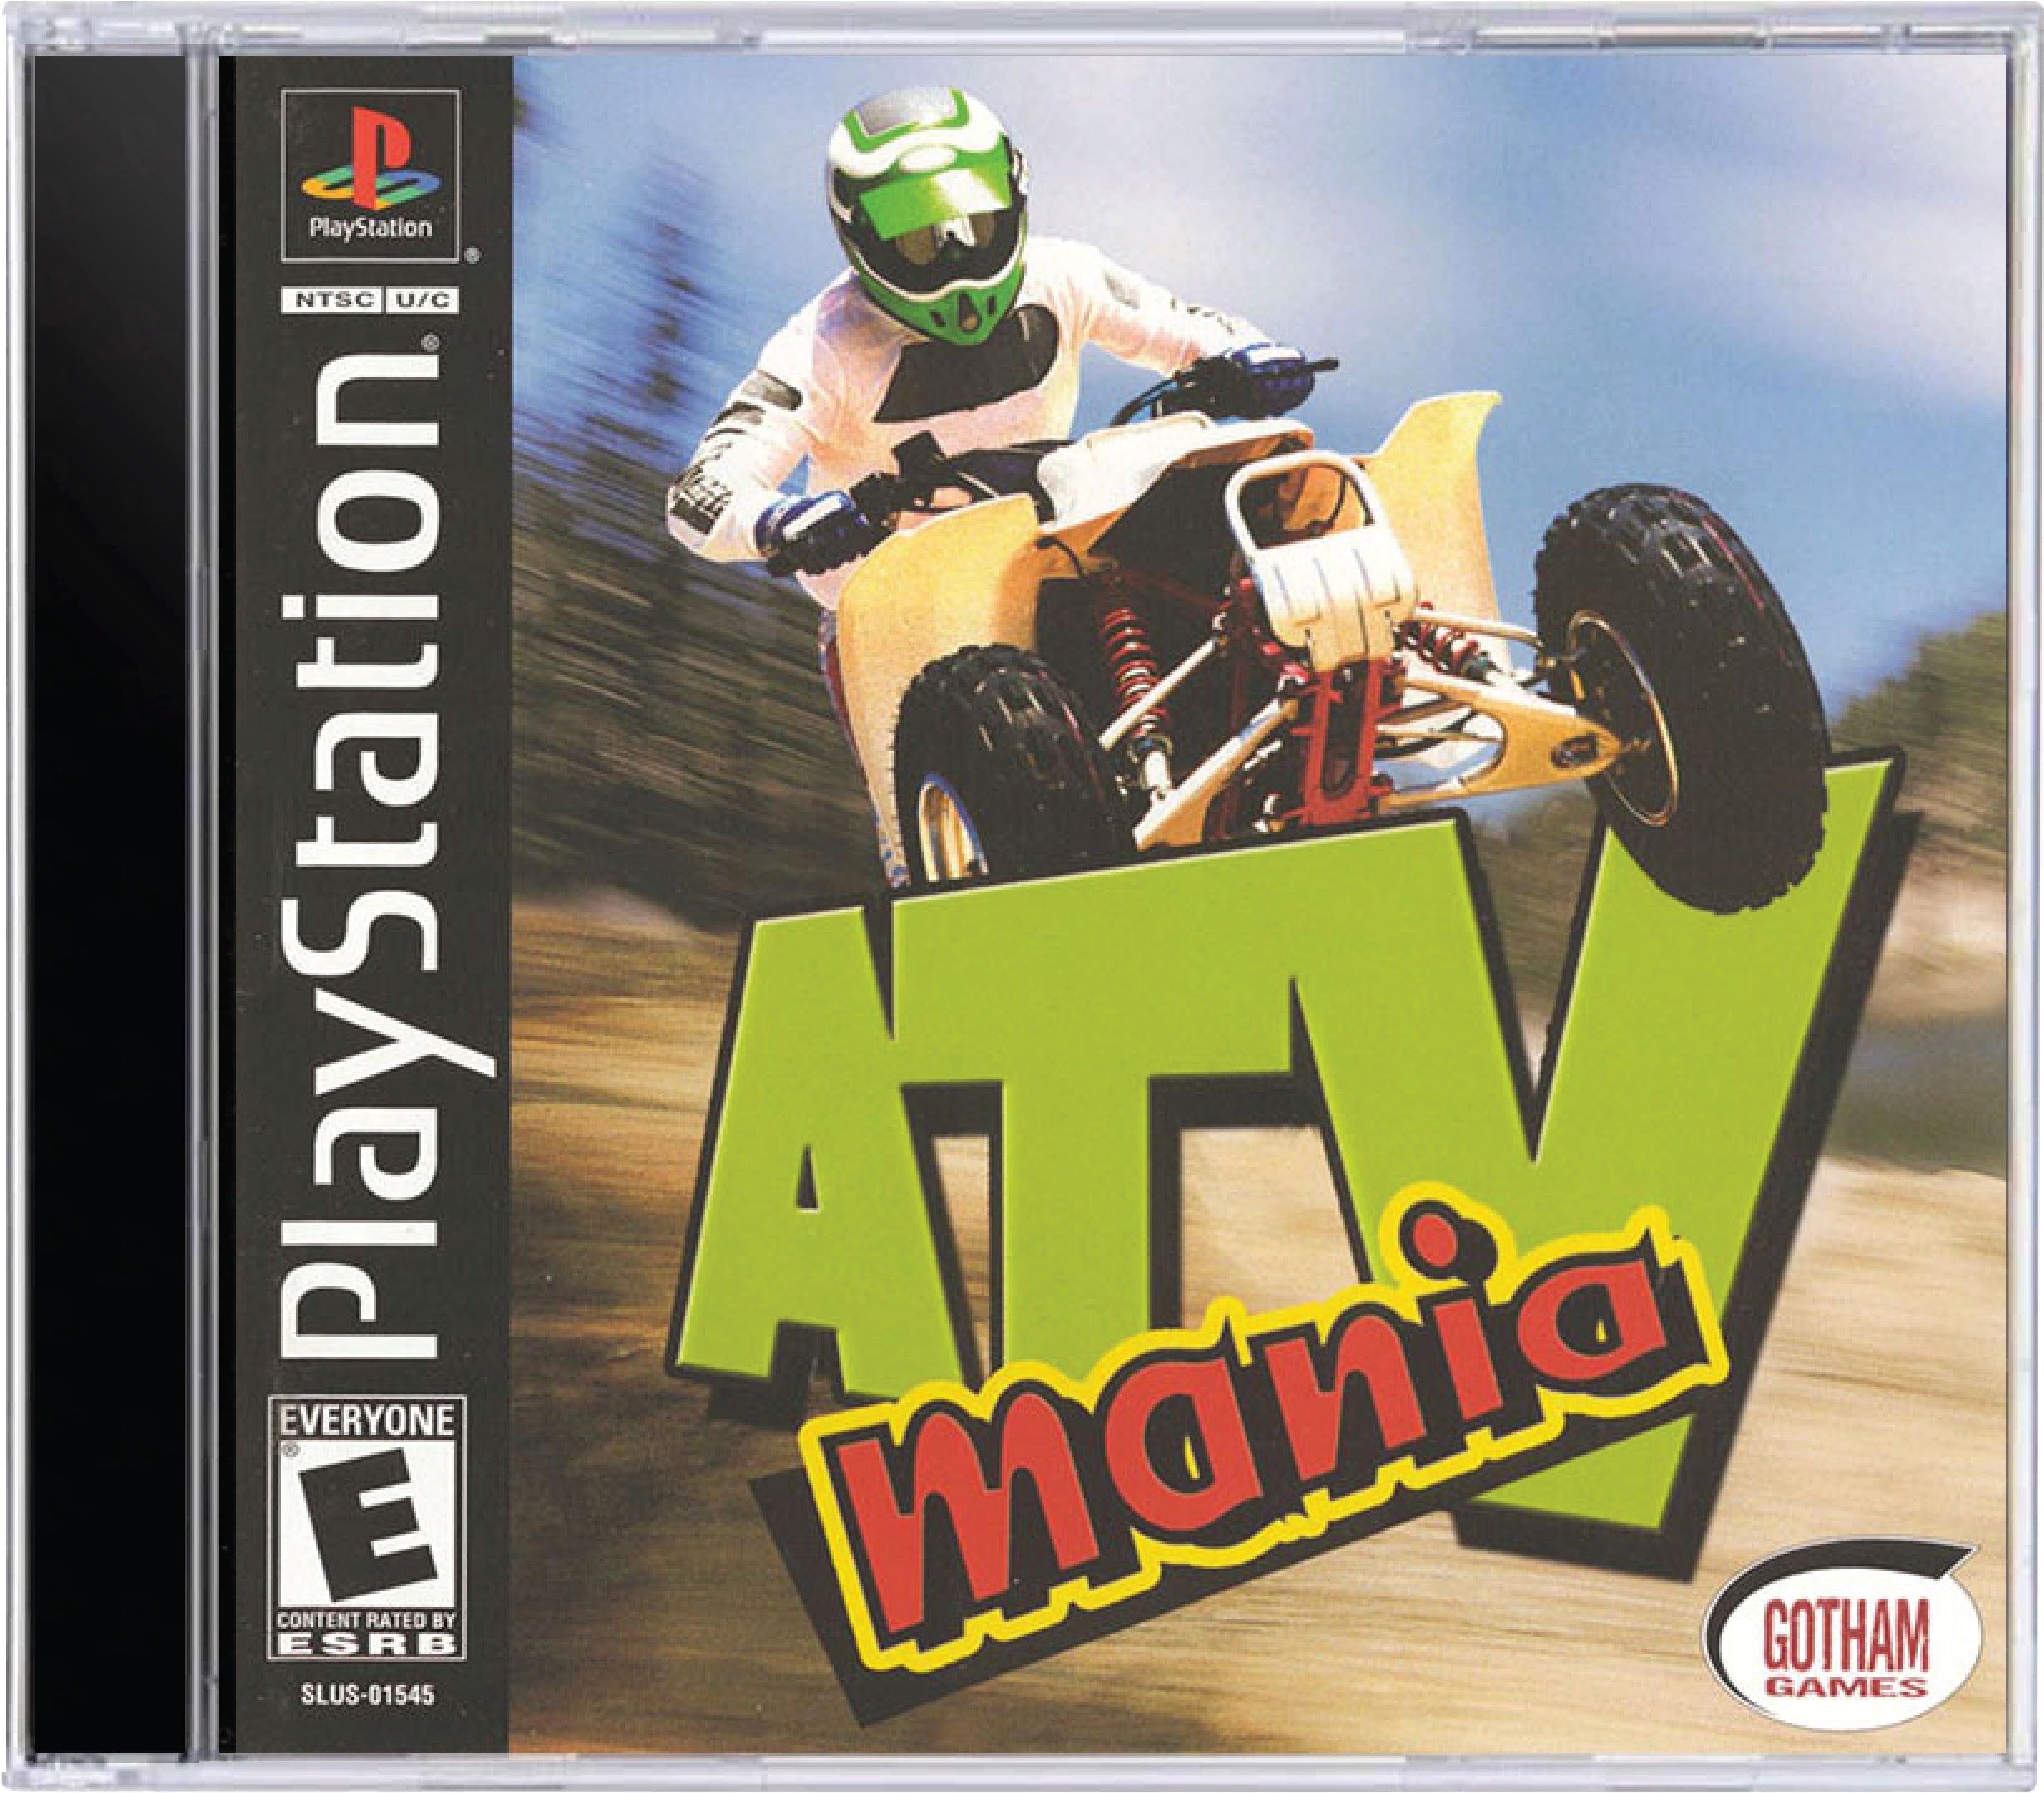 ATV Mania Cover Art and Product Photo